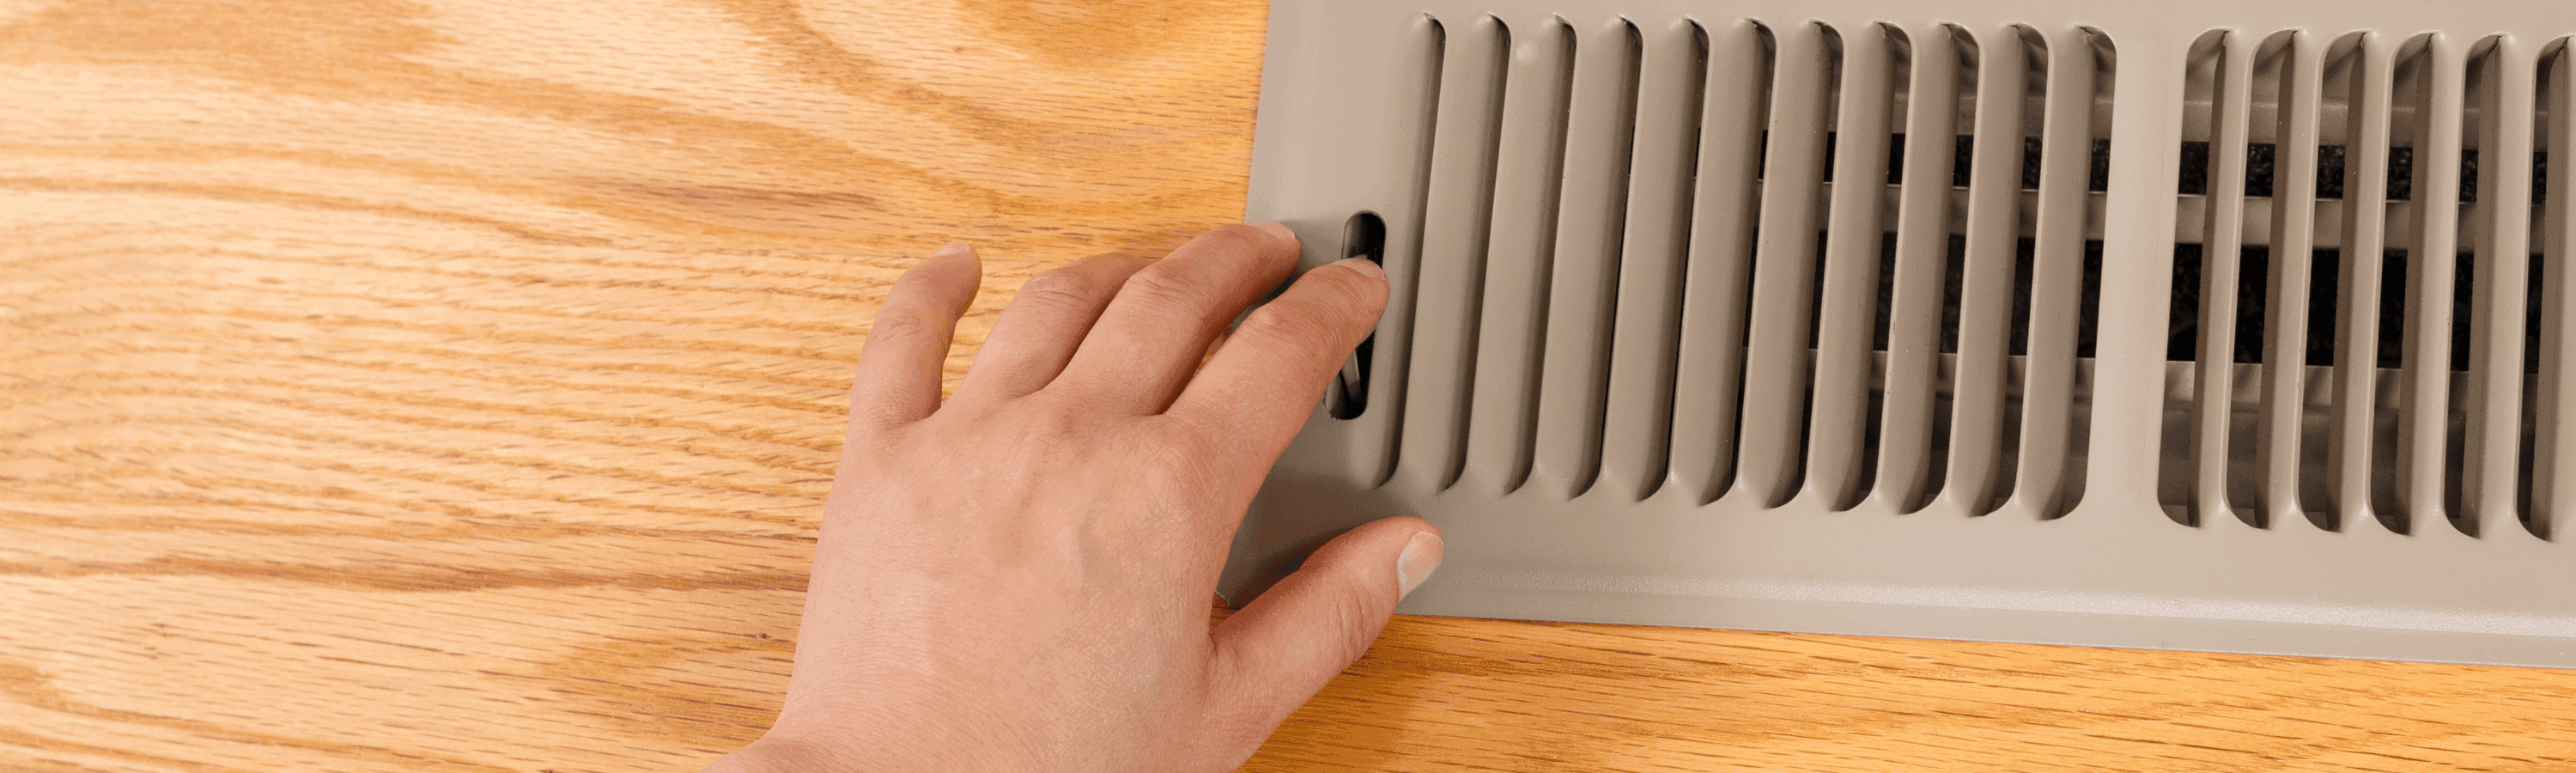 Reasons a Home's Heat Vent May Produce Inconsistent Temperatures